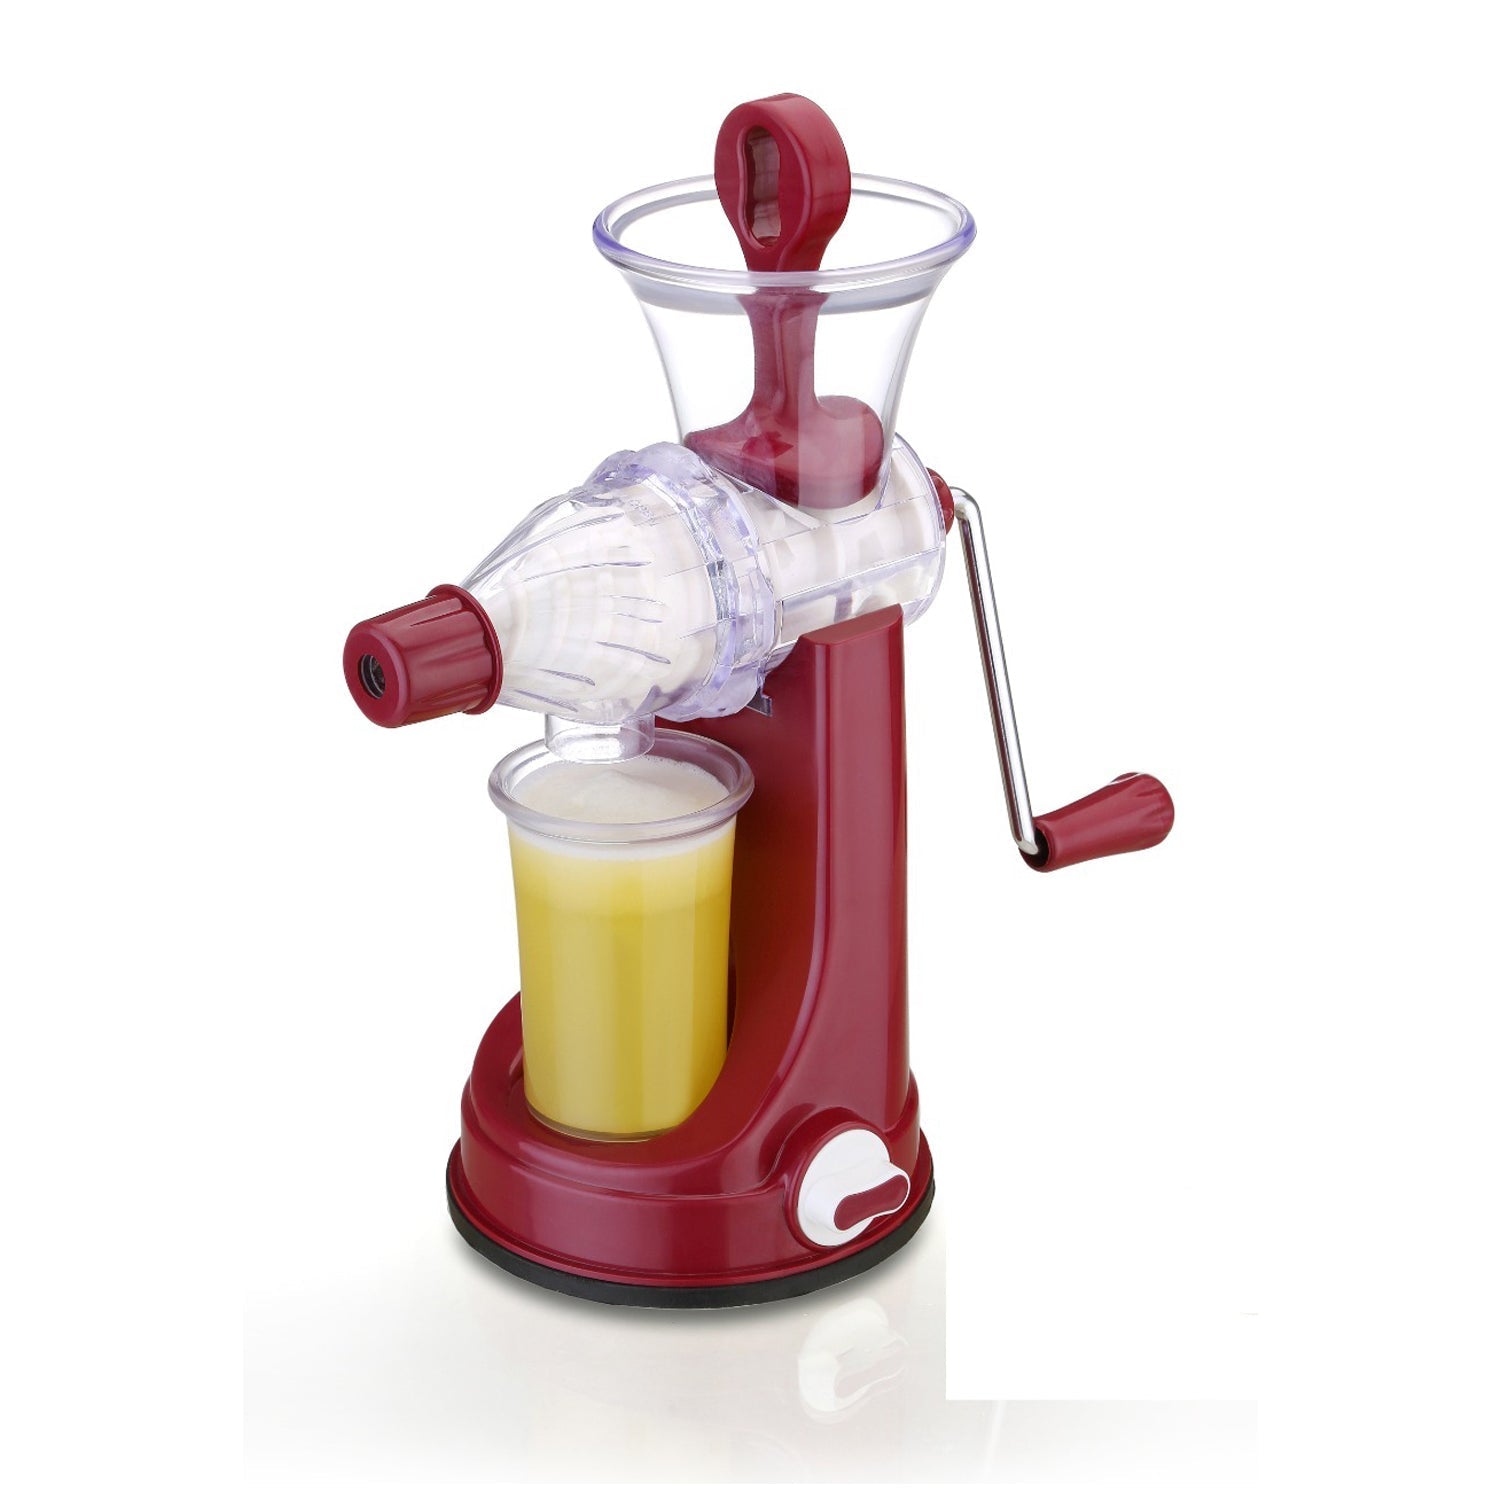 7017 ABS Juicer N Blender used in all kinds of household and kitchen purposes for making and blending of juices and beverages etc. DeoDap